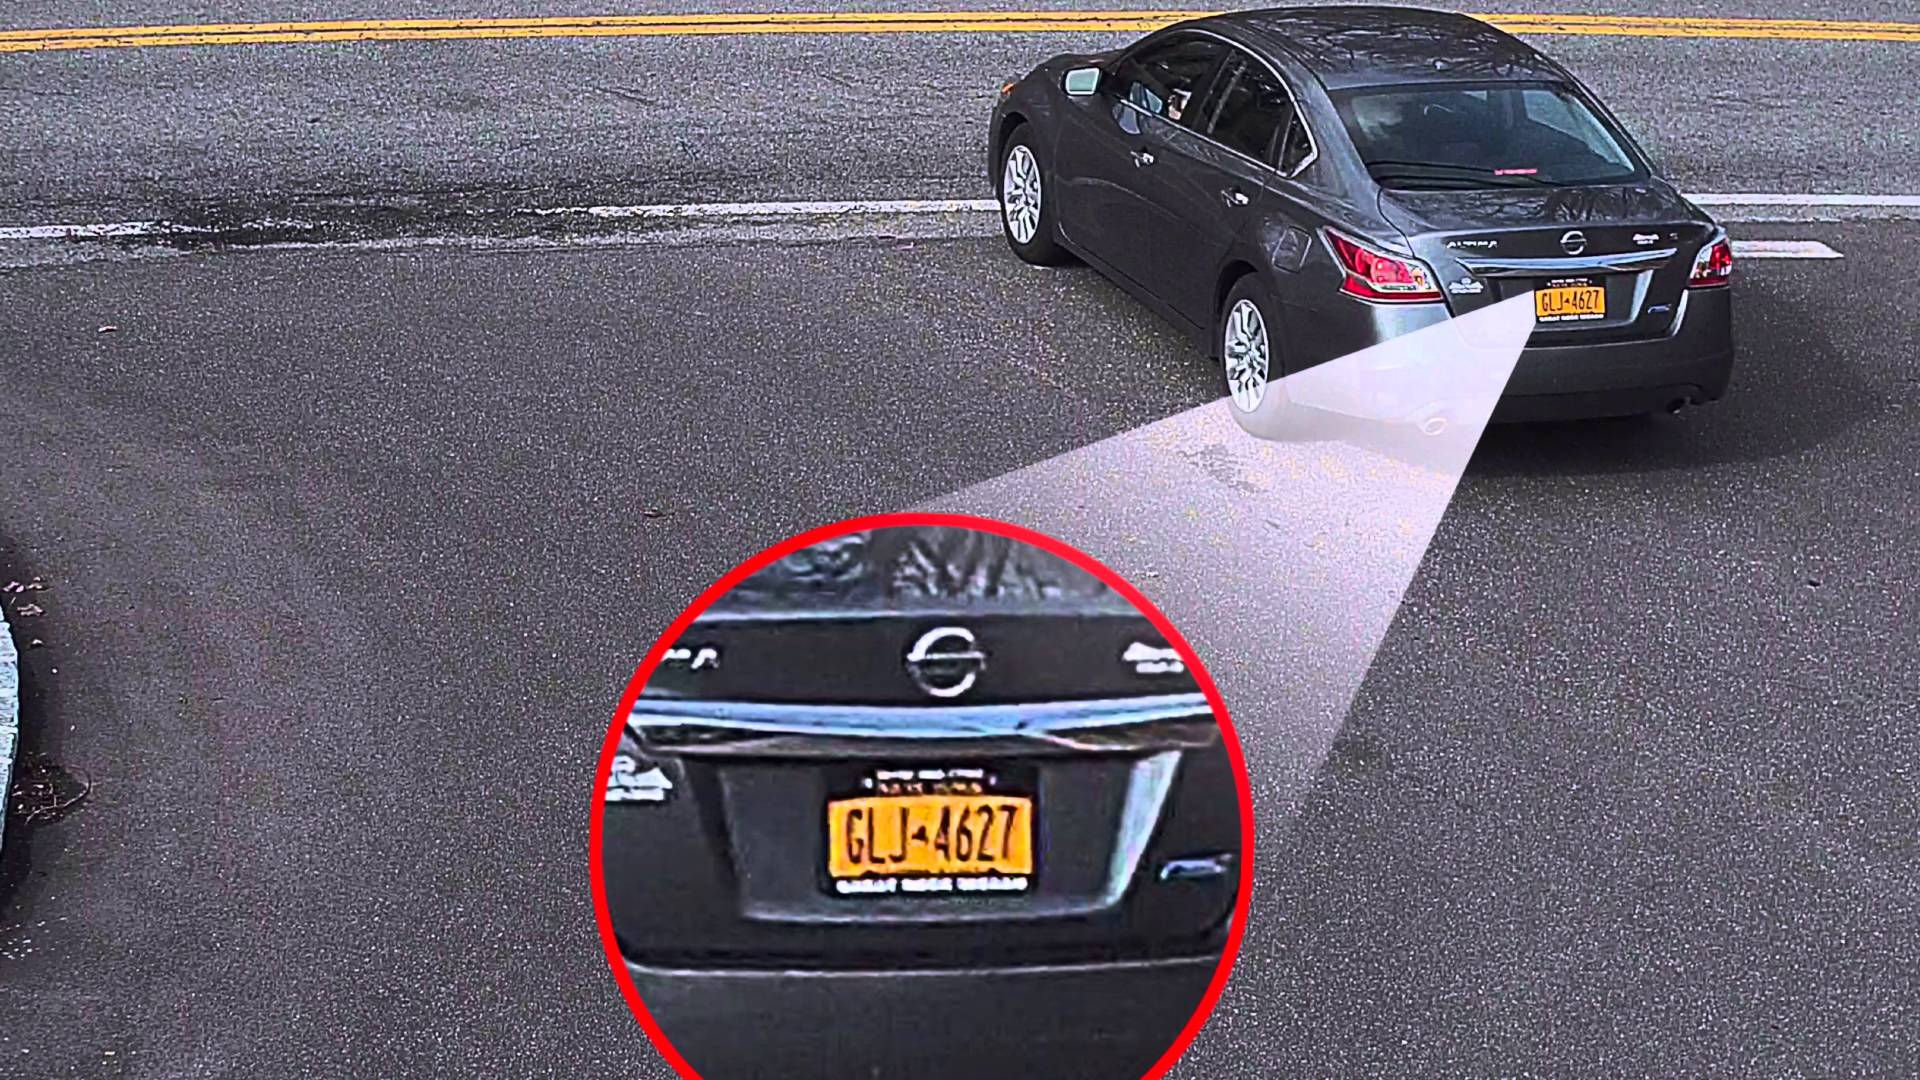 License plate capture example